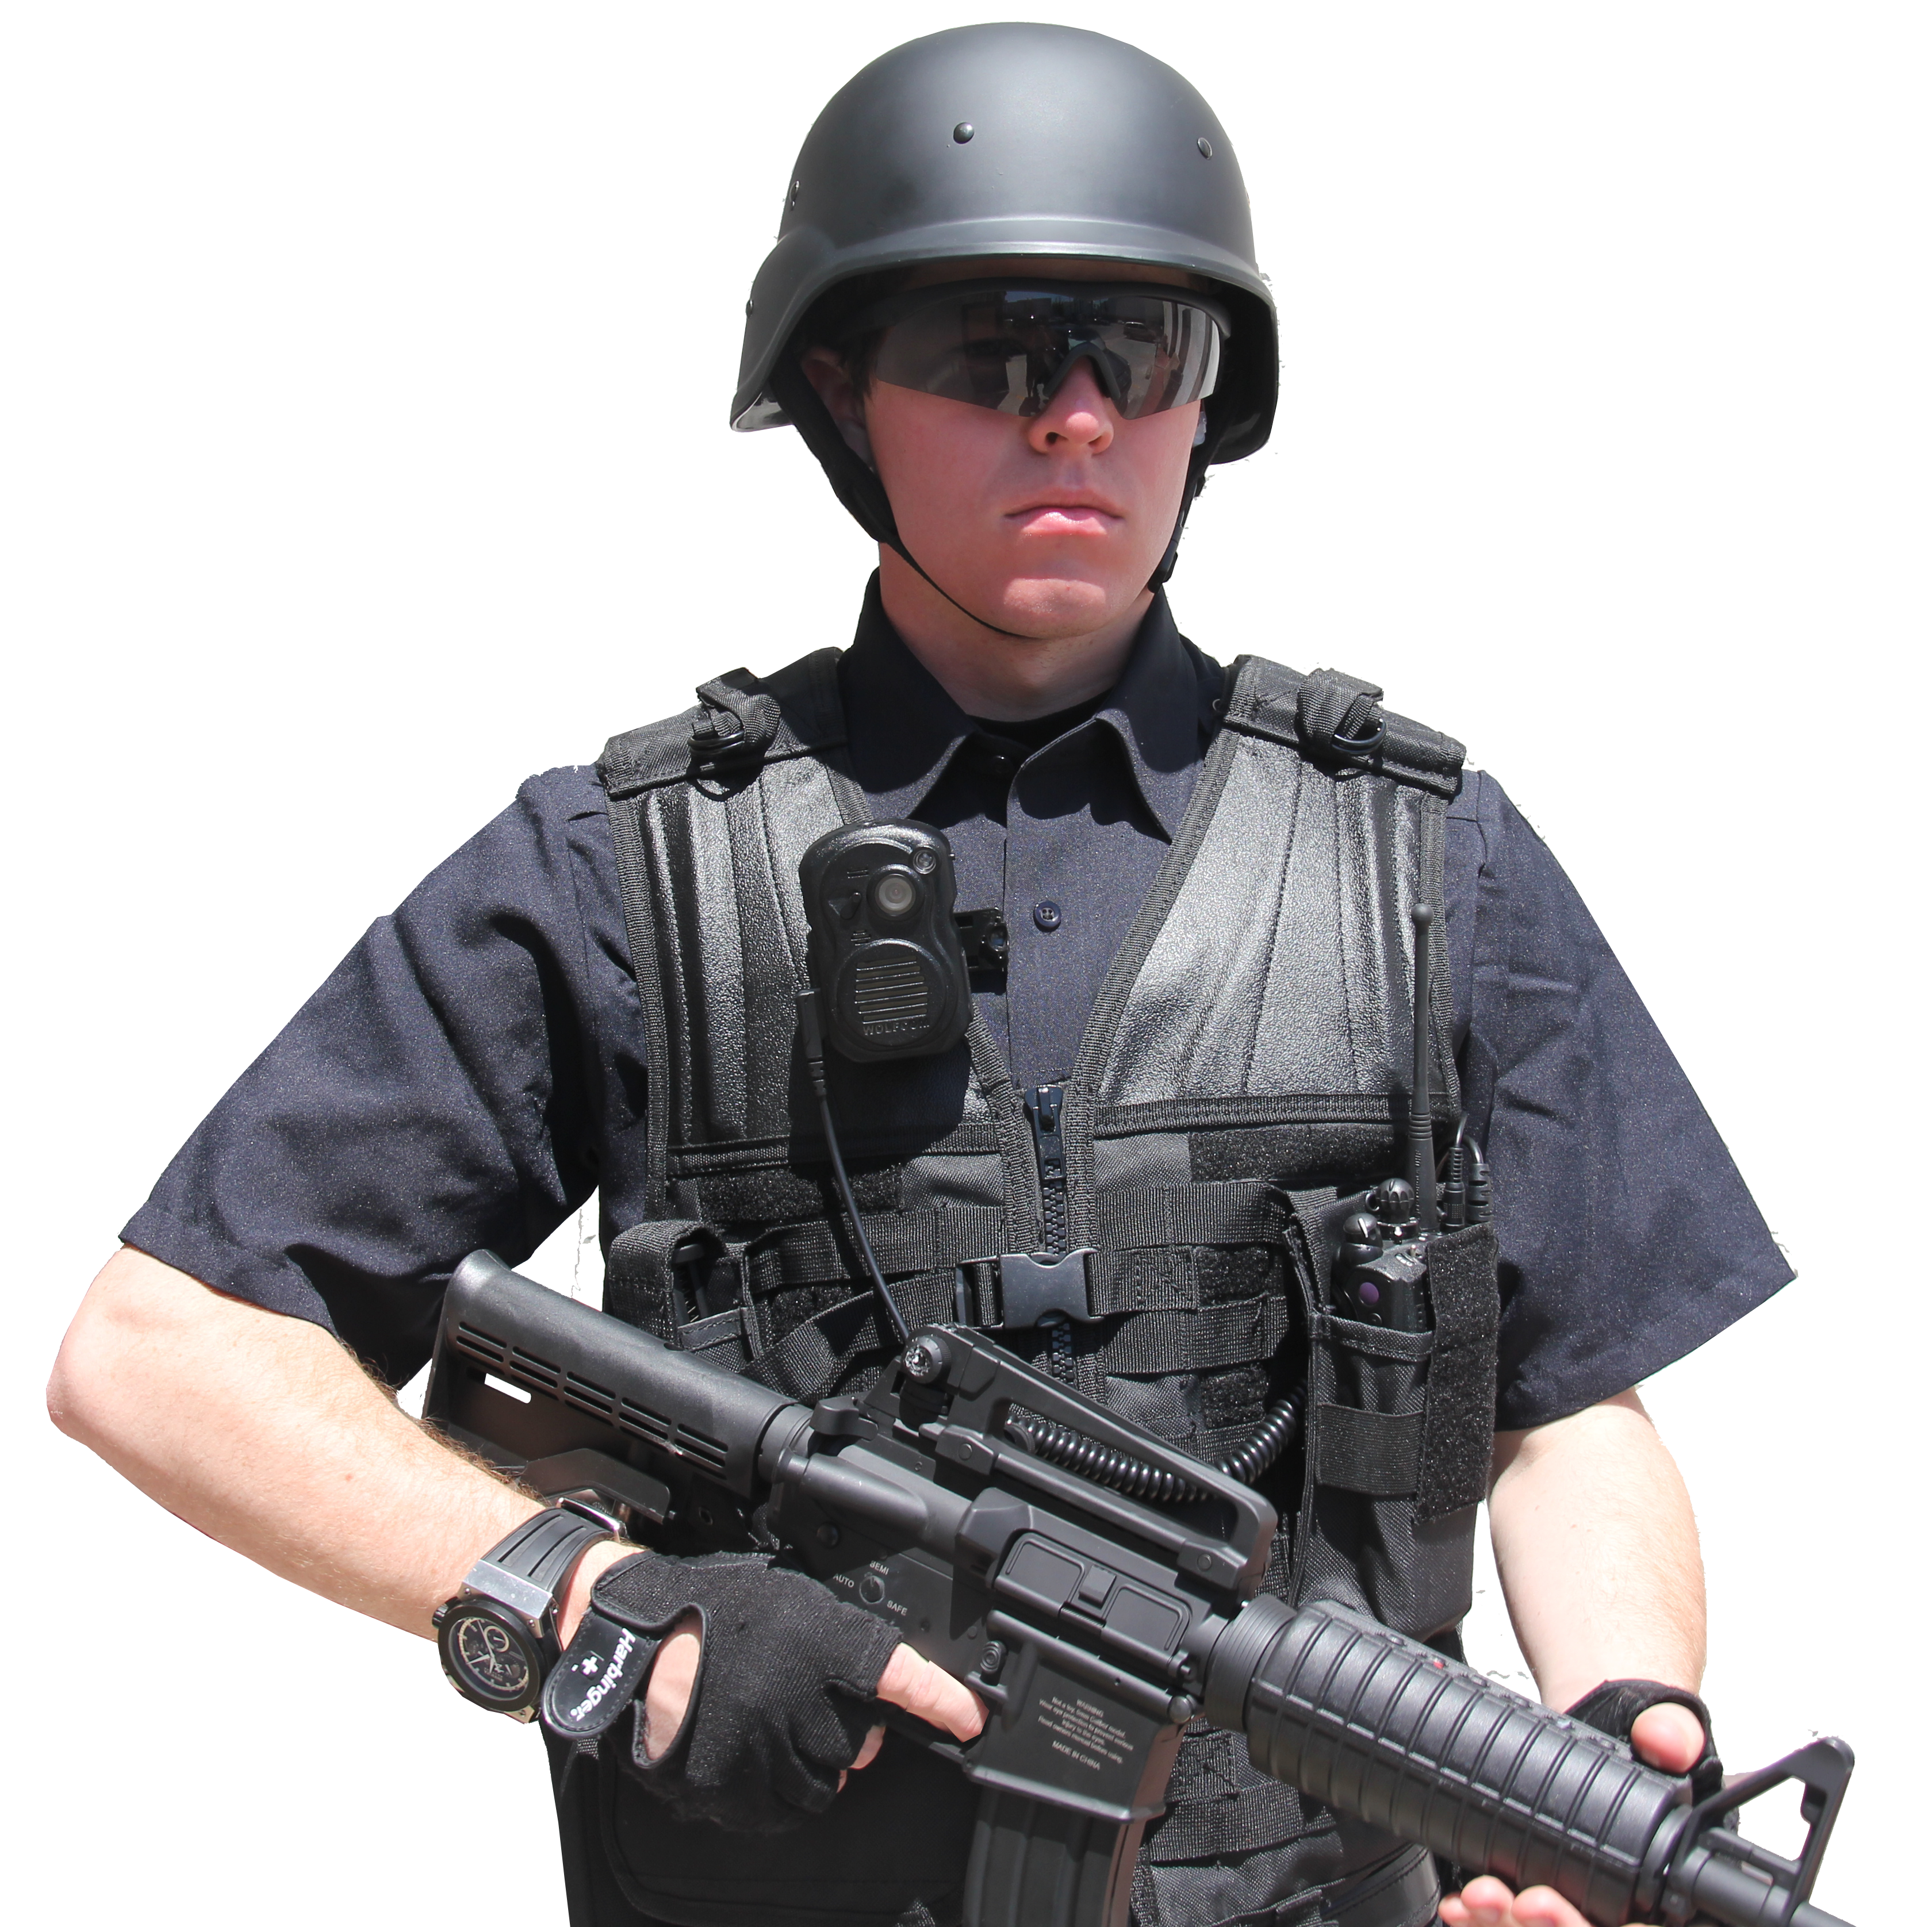 Swat officer with body camera.